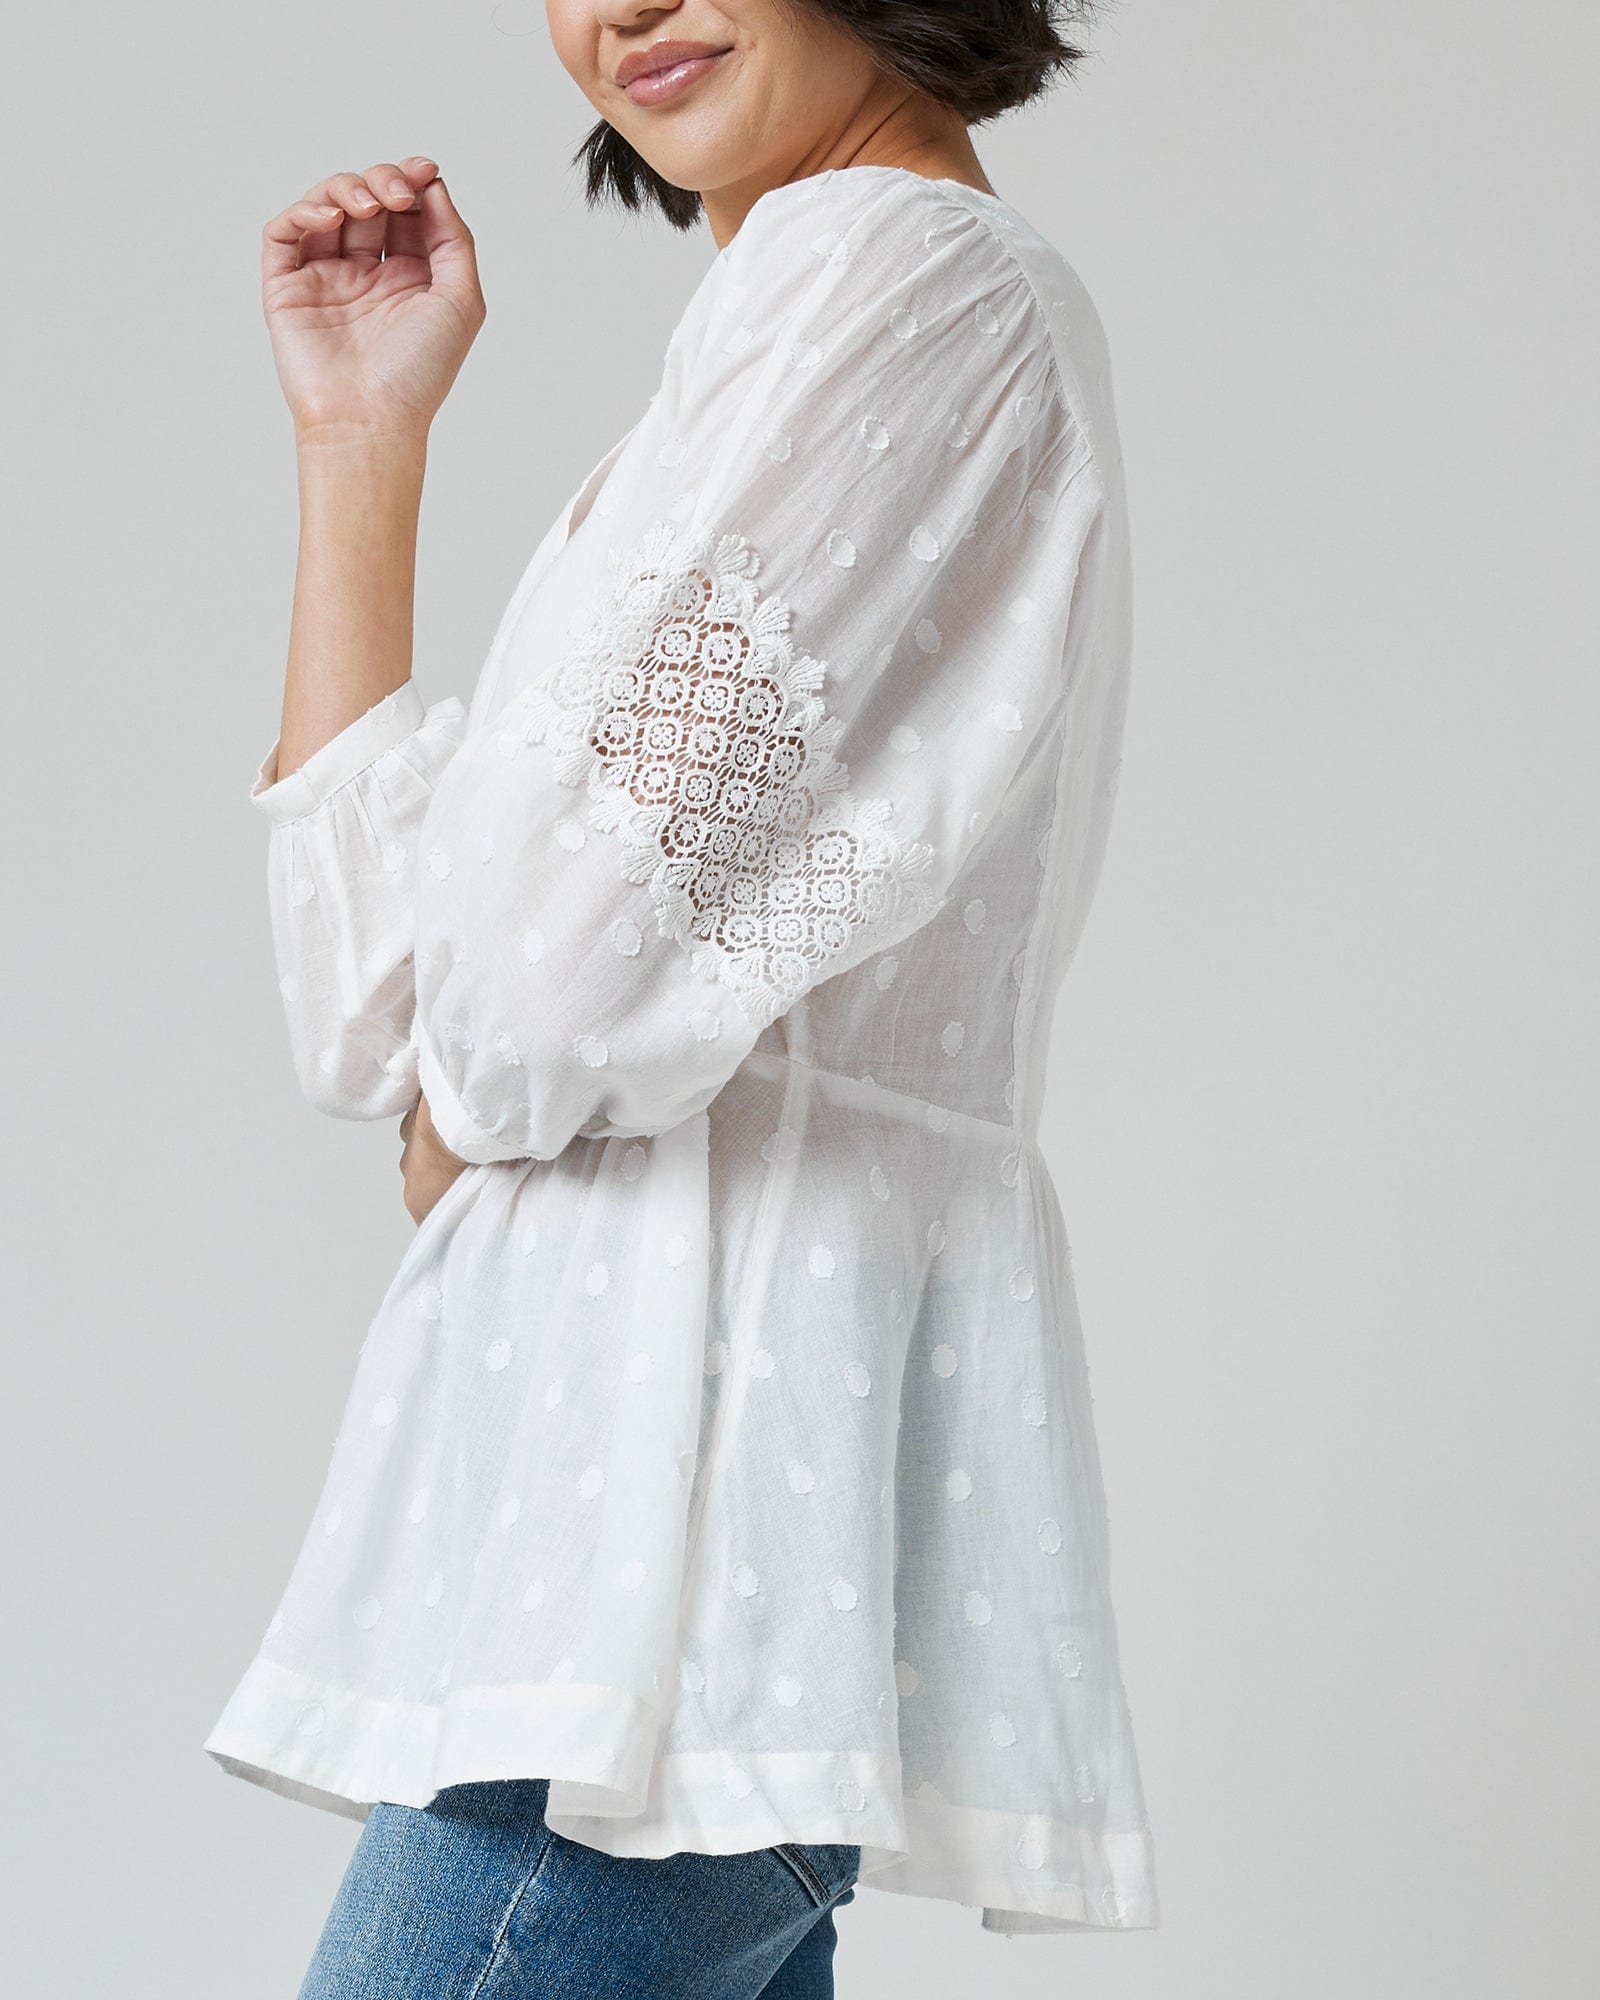 Woman in a white, 3/4 sleeve, peplum blouse